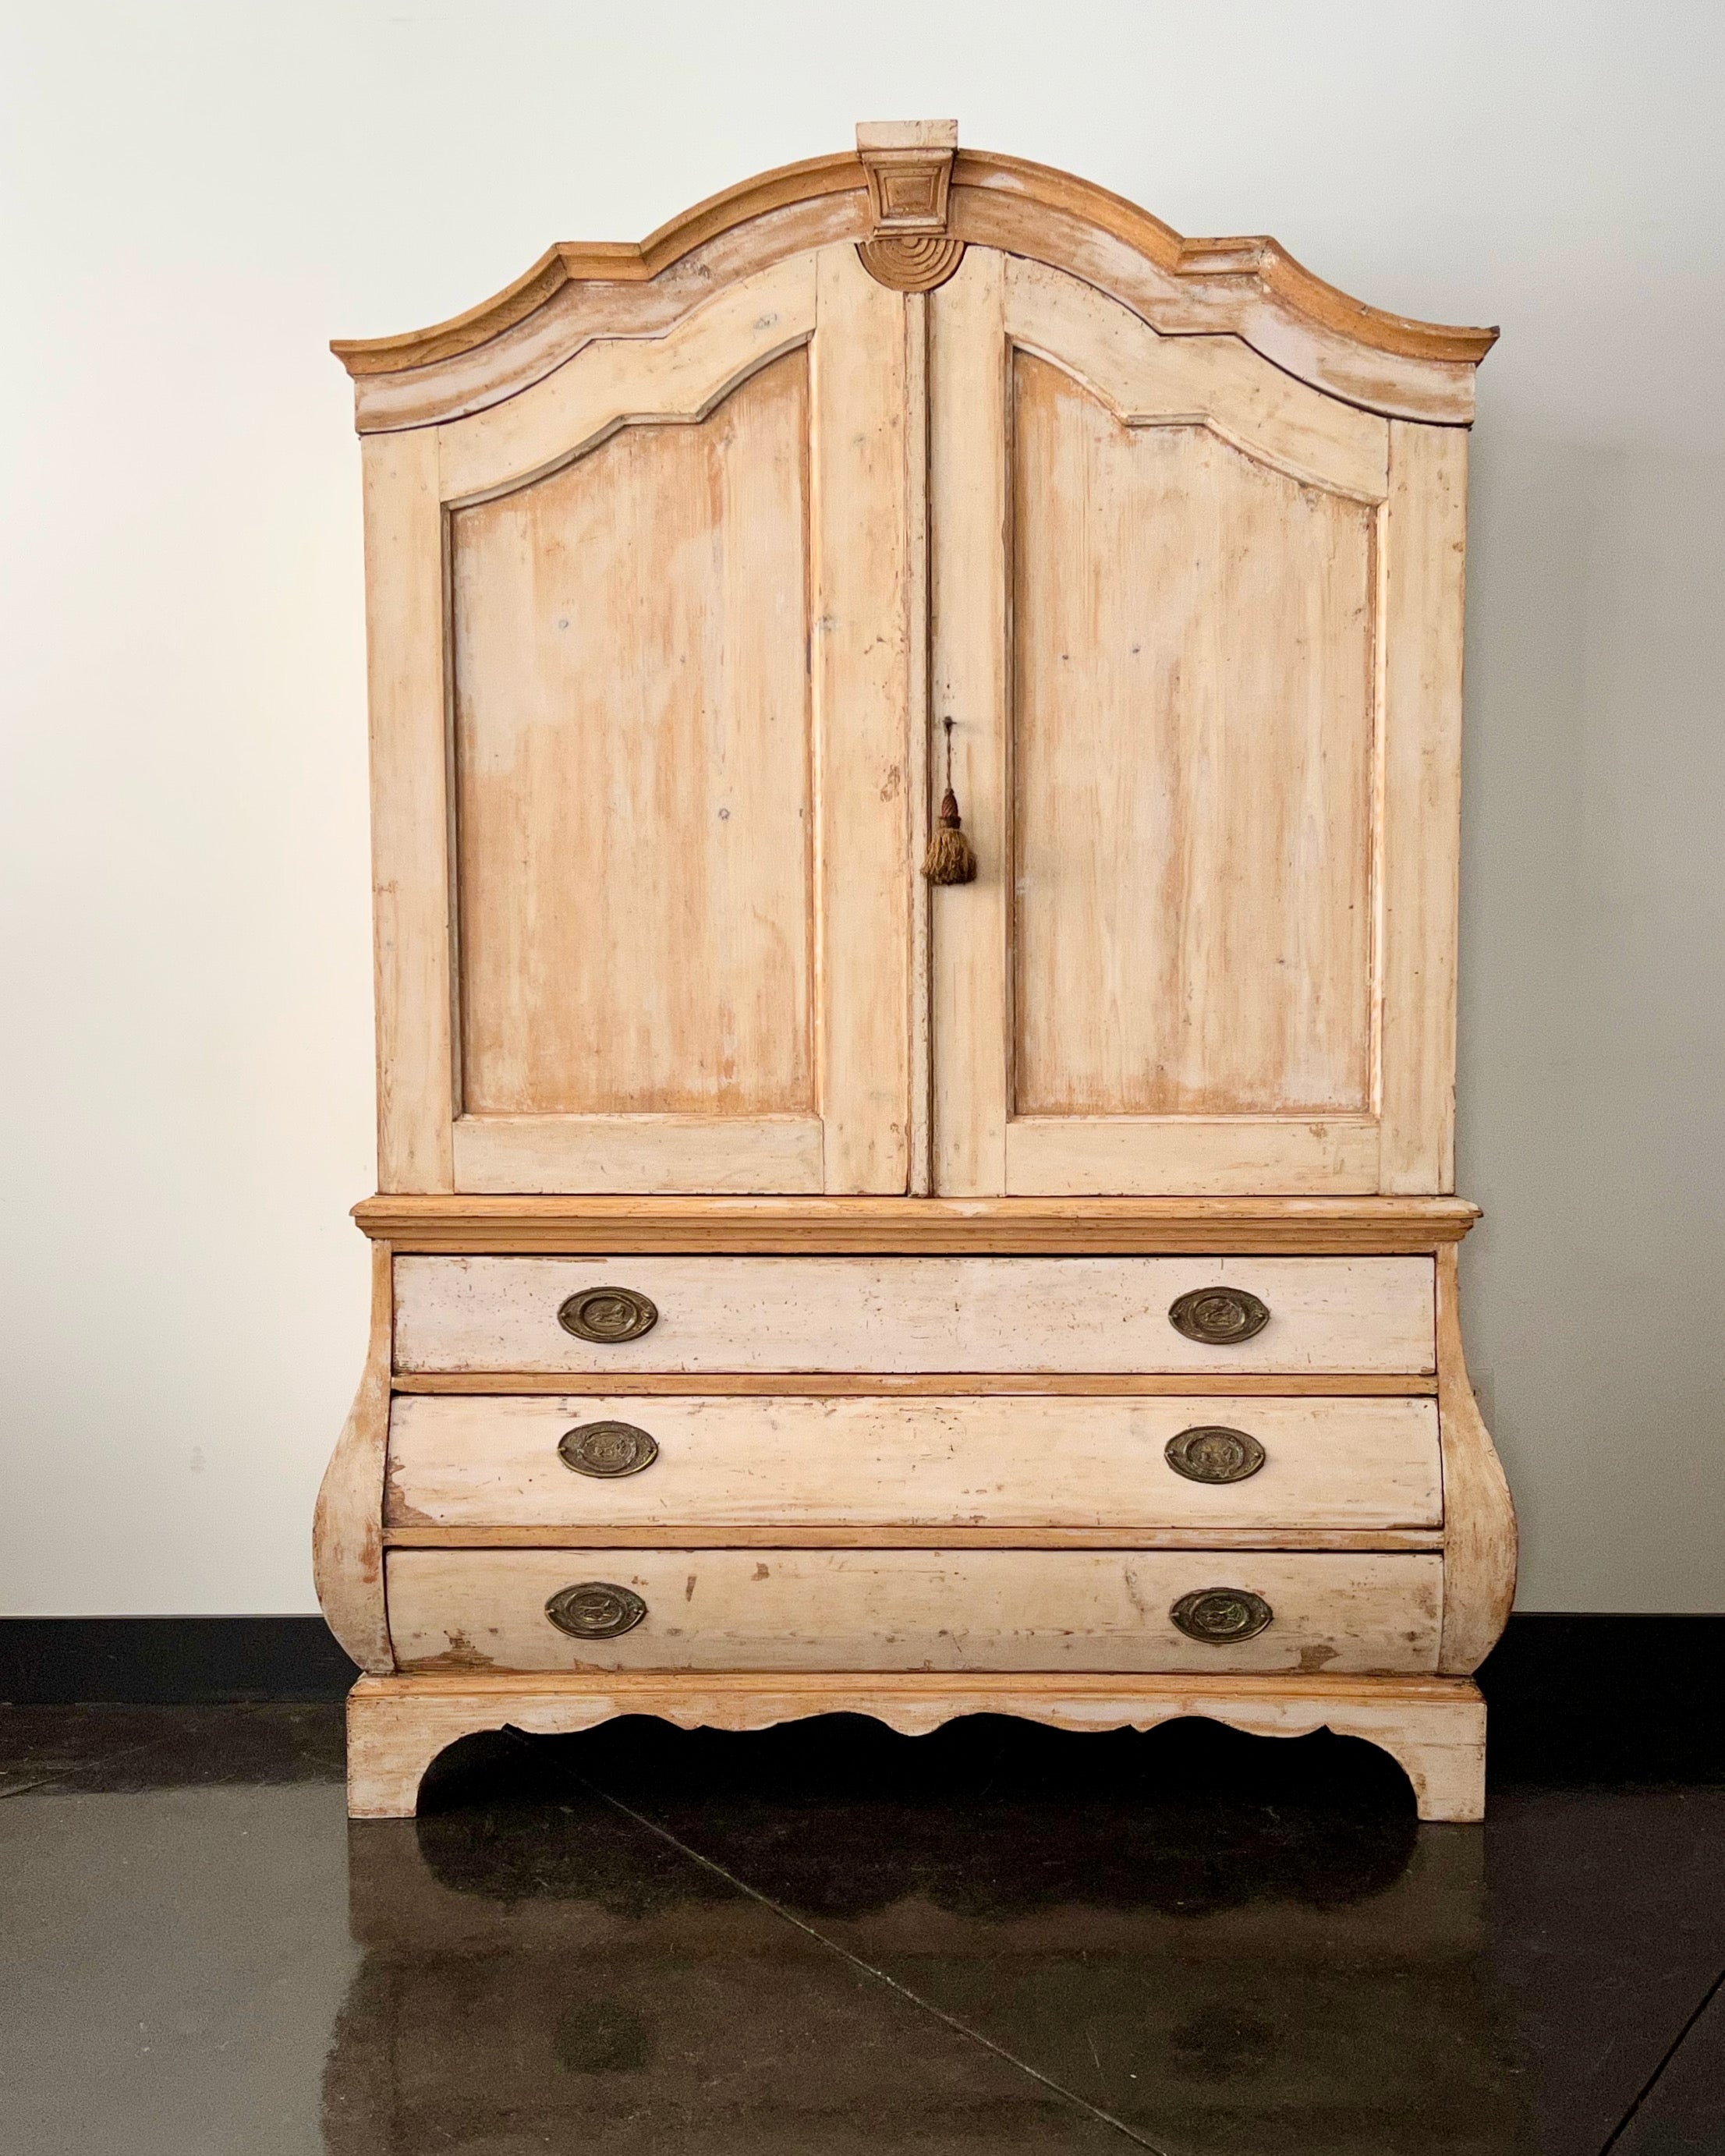 18th century Dutch in original painted oak two peace cabinet with simply carved unusual crest. The double paneled door upper cabinet sits atop three bombé drawers with beautiful decorative original bronze hardwares. Scalloped skirt with carved